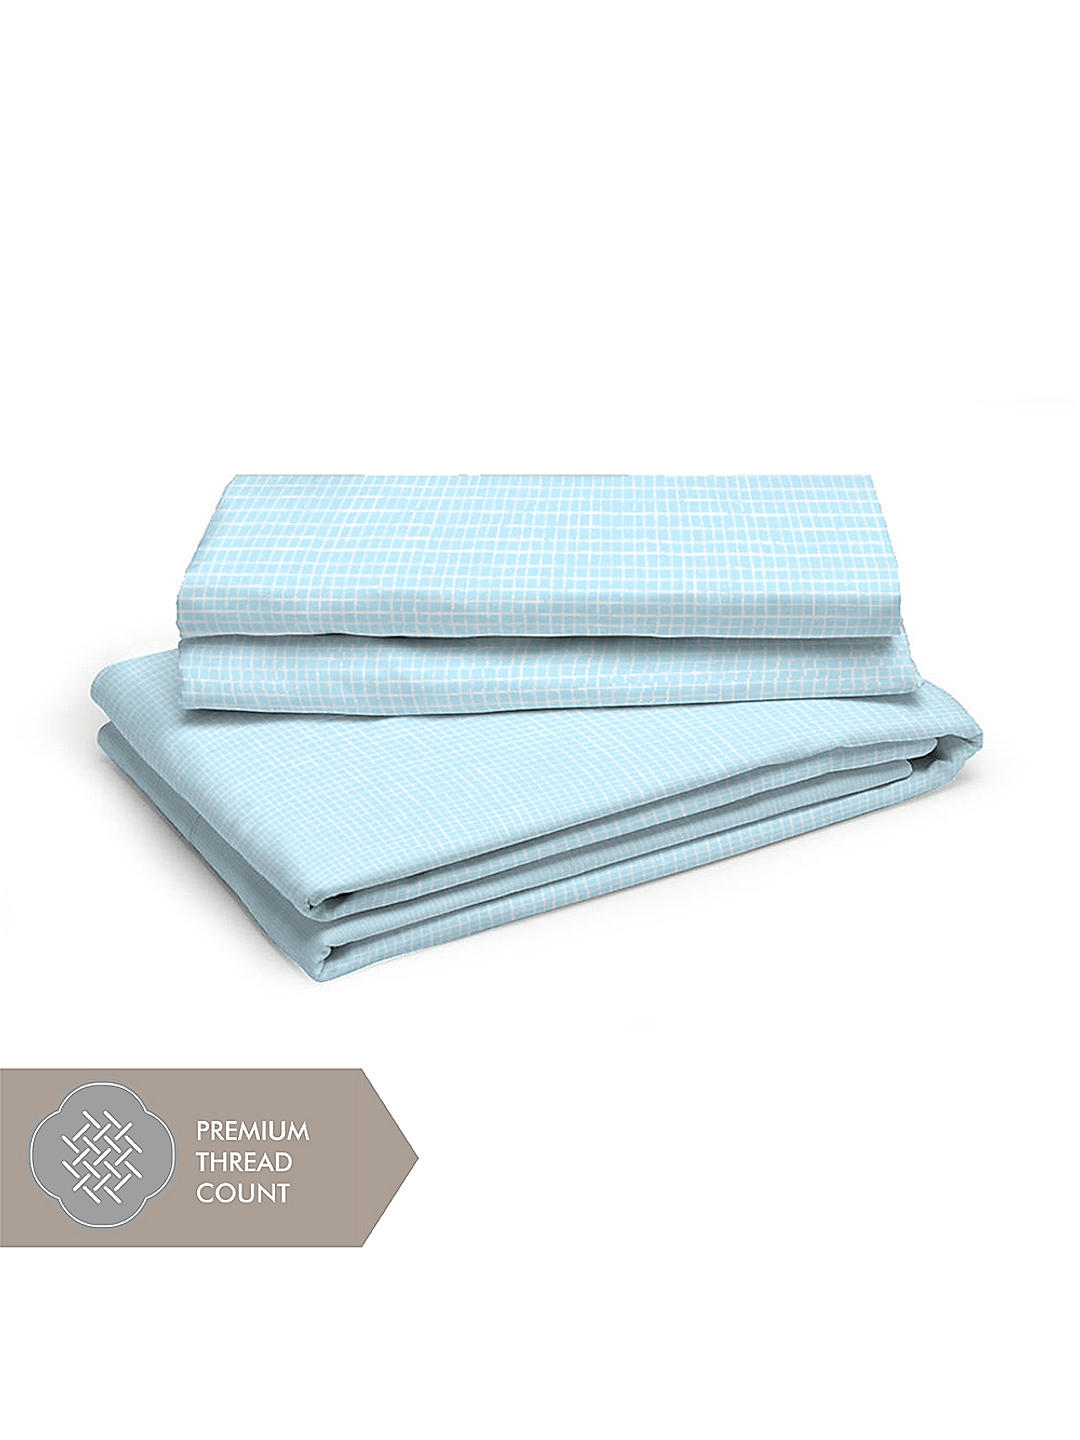 Cottage Garden-1 300 TC 100% cotton Ultra Fine Blue Colored Checkered Print Double Bed Sheet Set